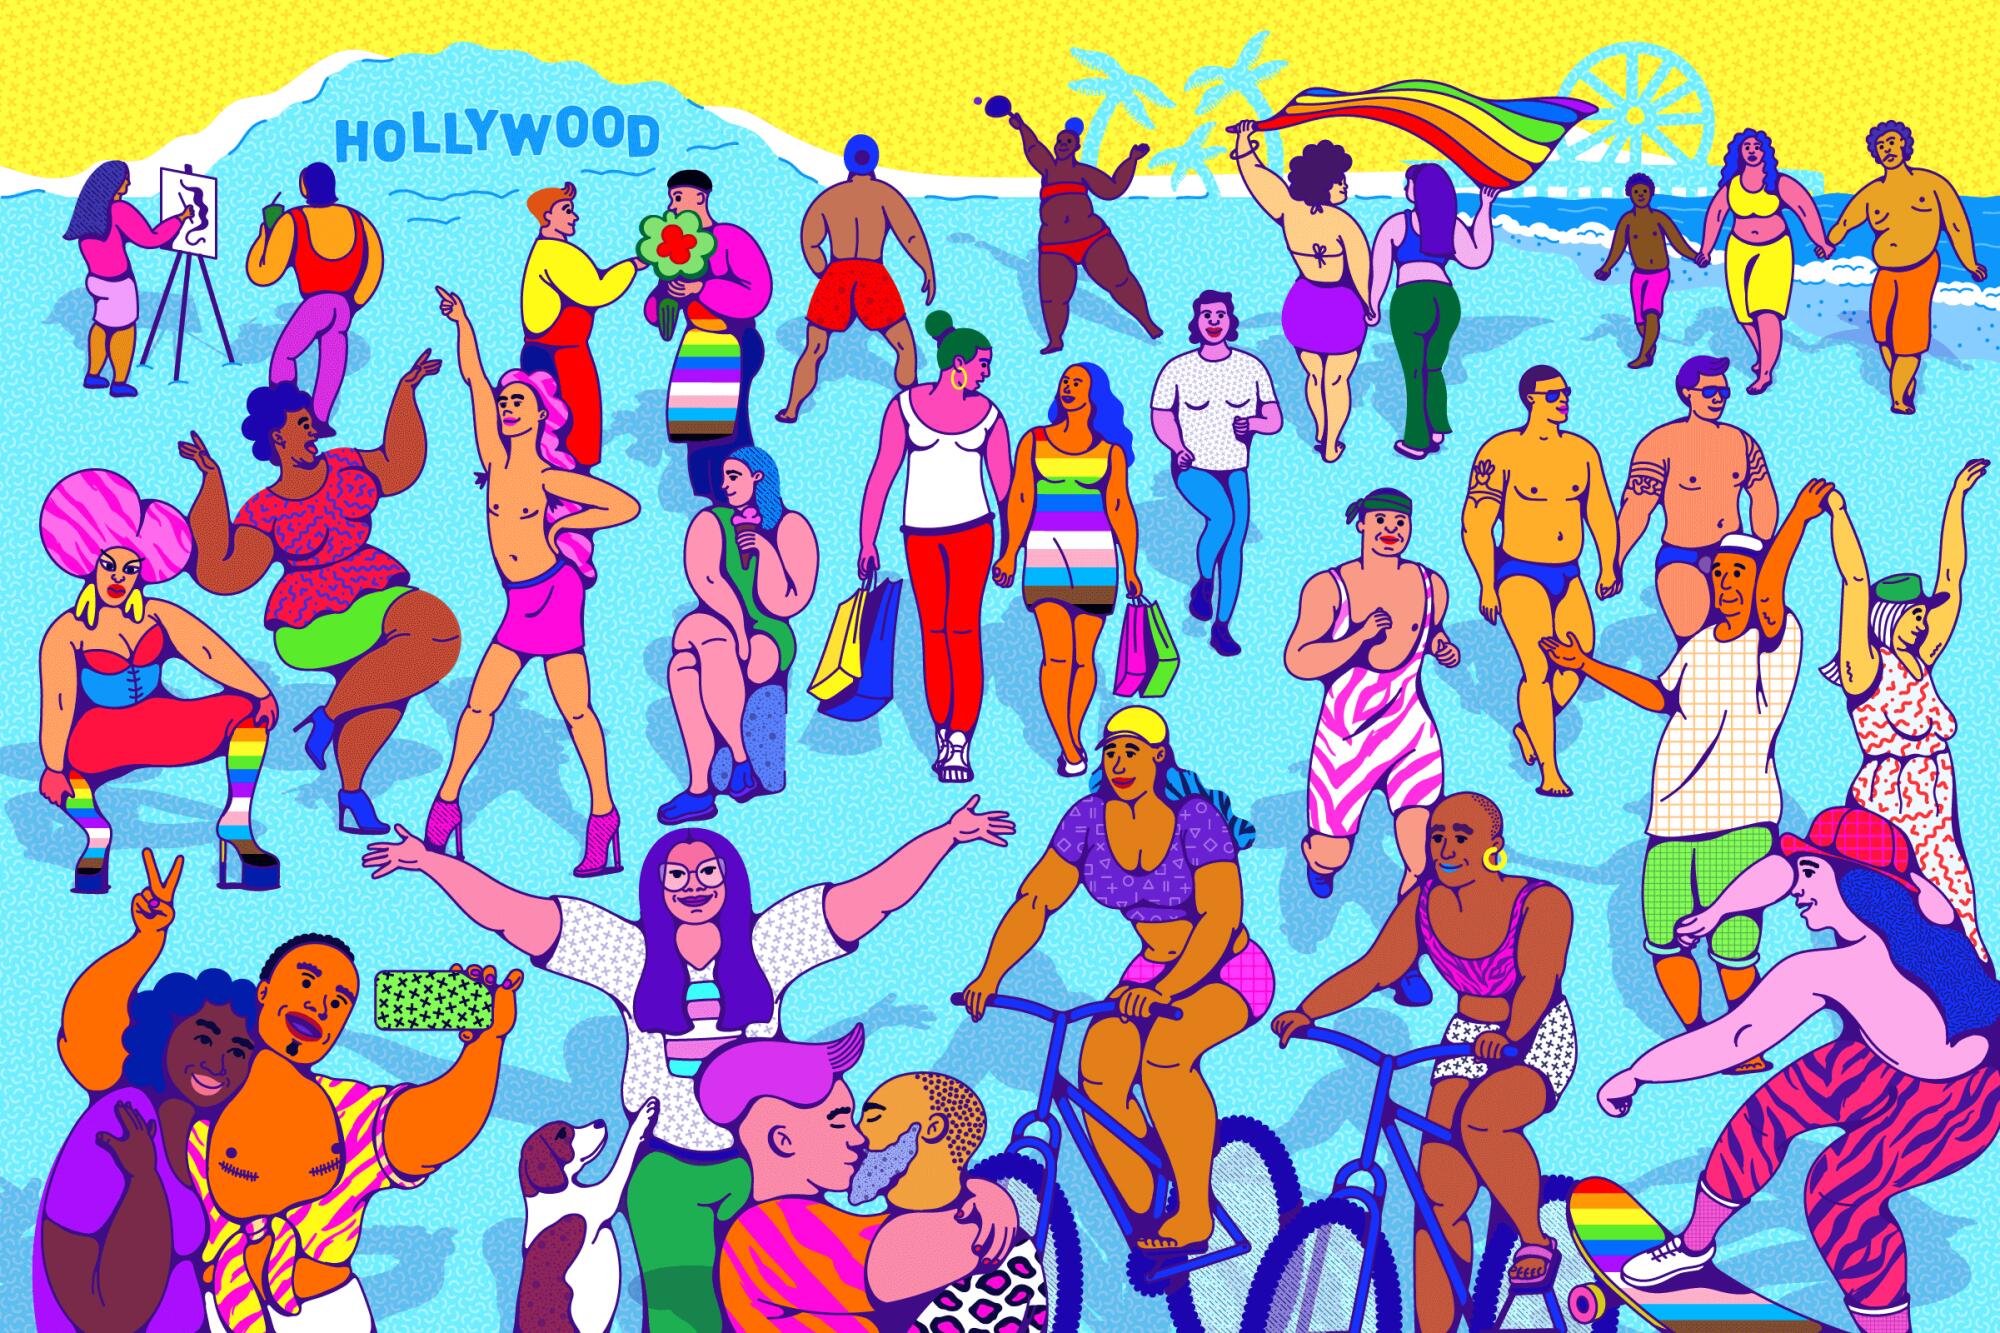 An illustration of diverse people, families, in various activities, wearing colorful outfits with landmarks in the distance.